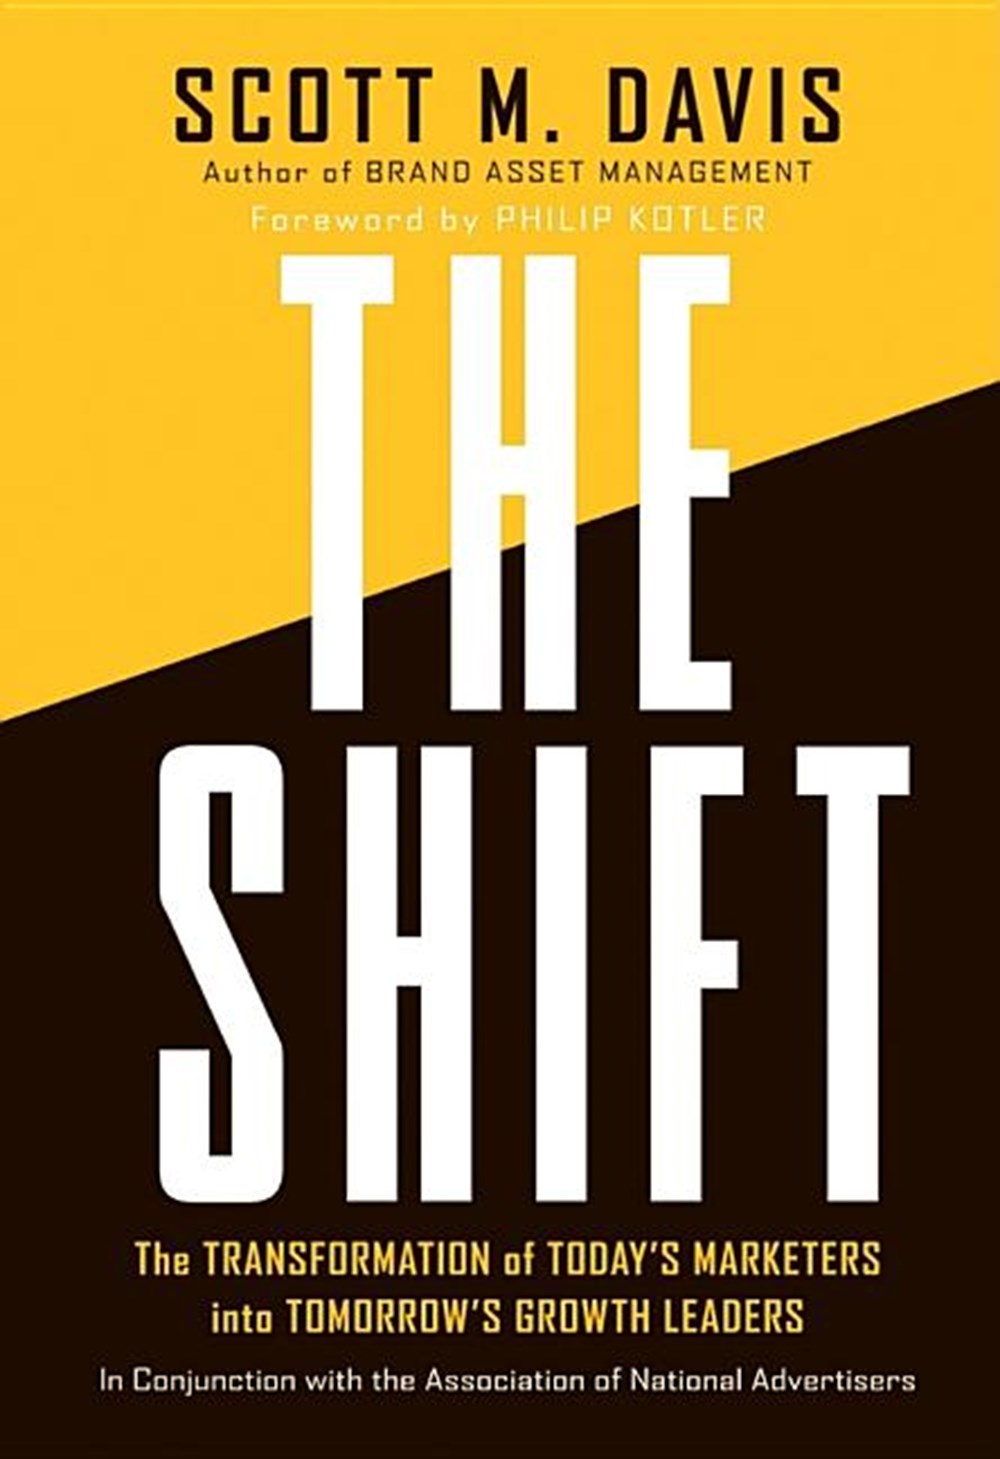 Shift: The Transformation of Today's Marketers Into Tomorrow's Growth Leaders